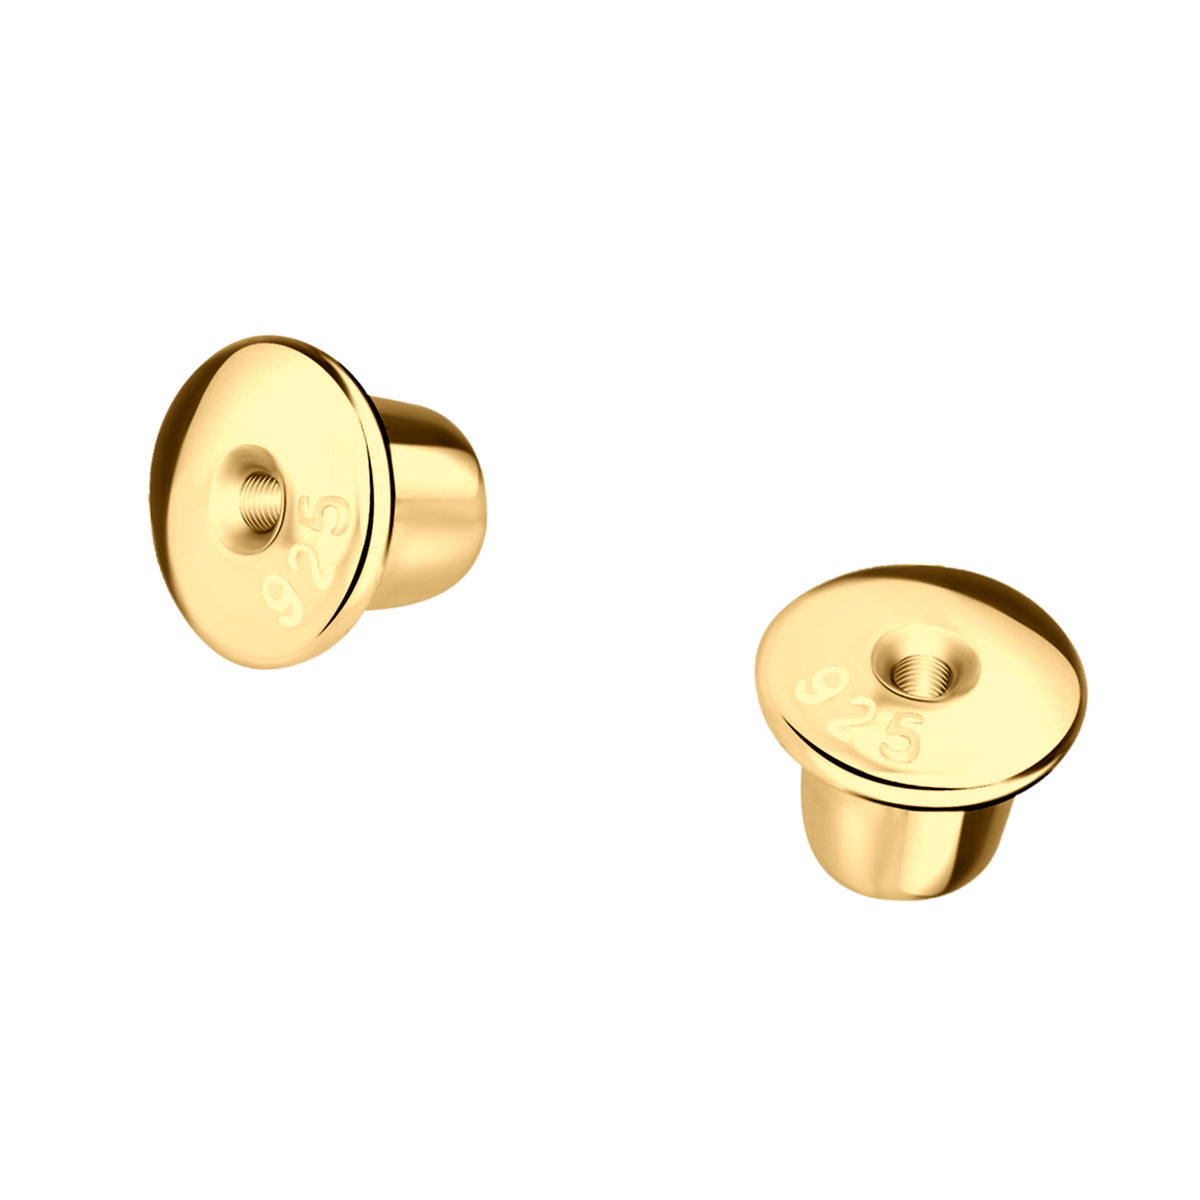 Color Merchants 14k Yellow Gold Screw-Back Type Replacement